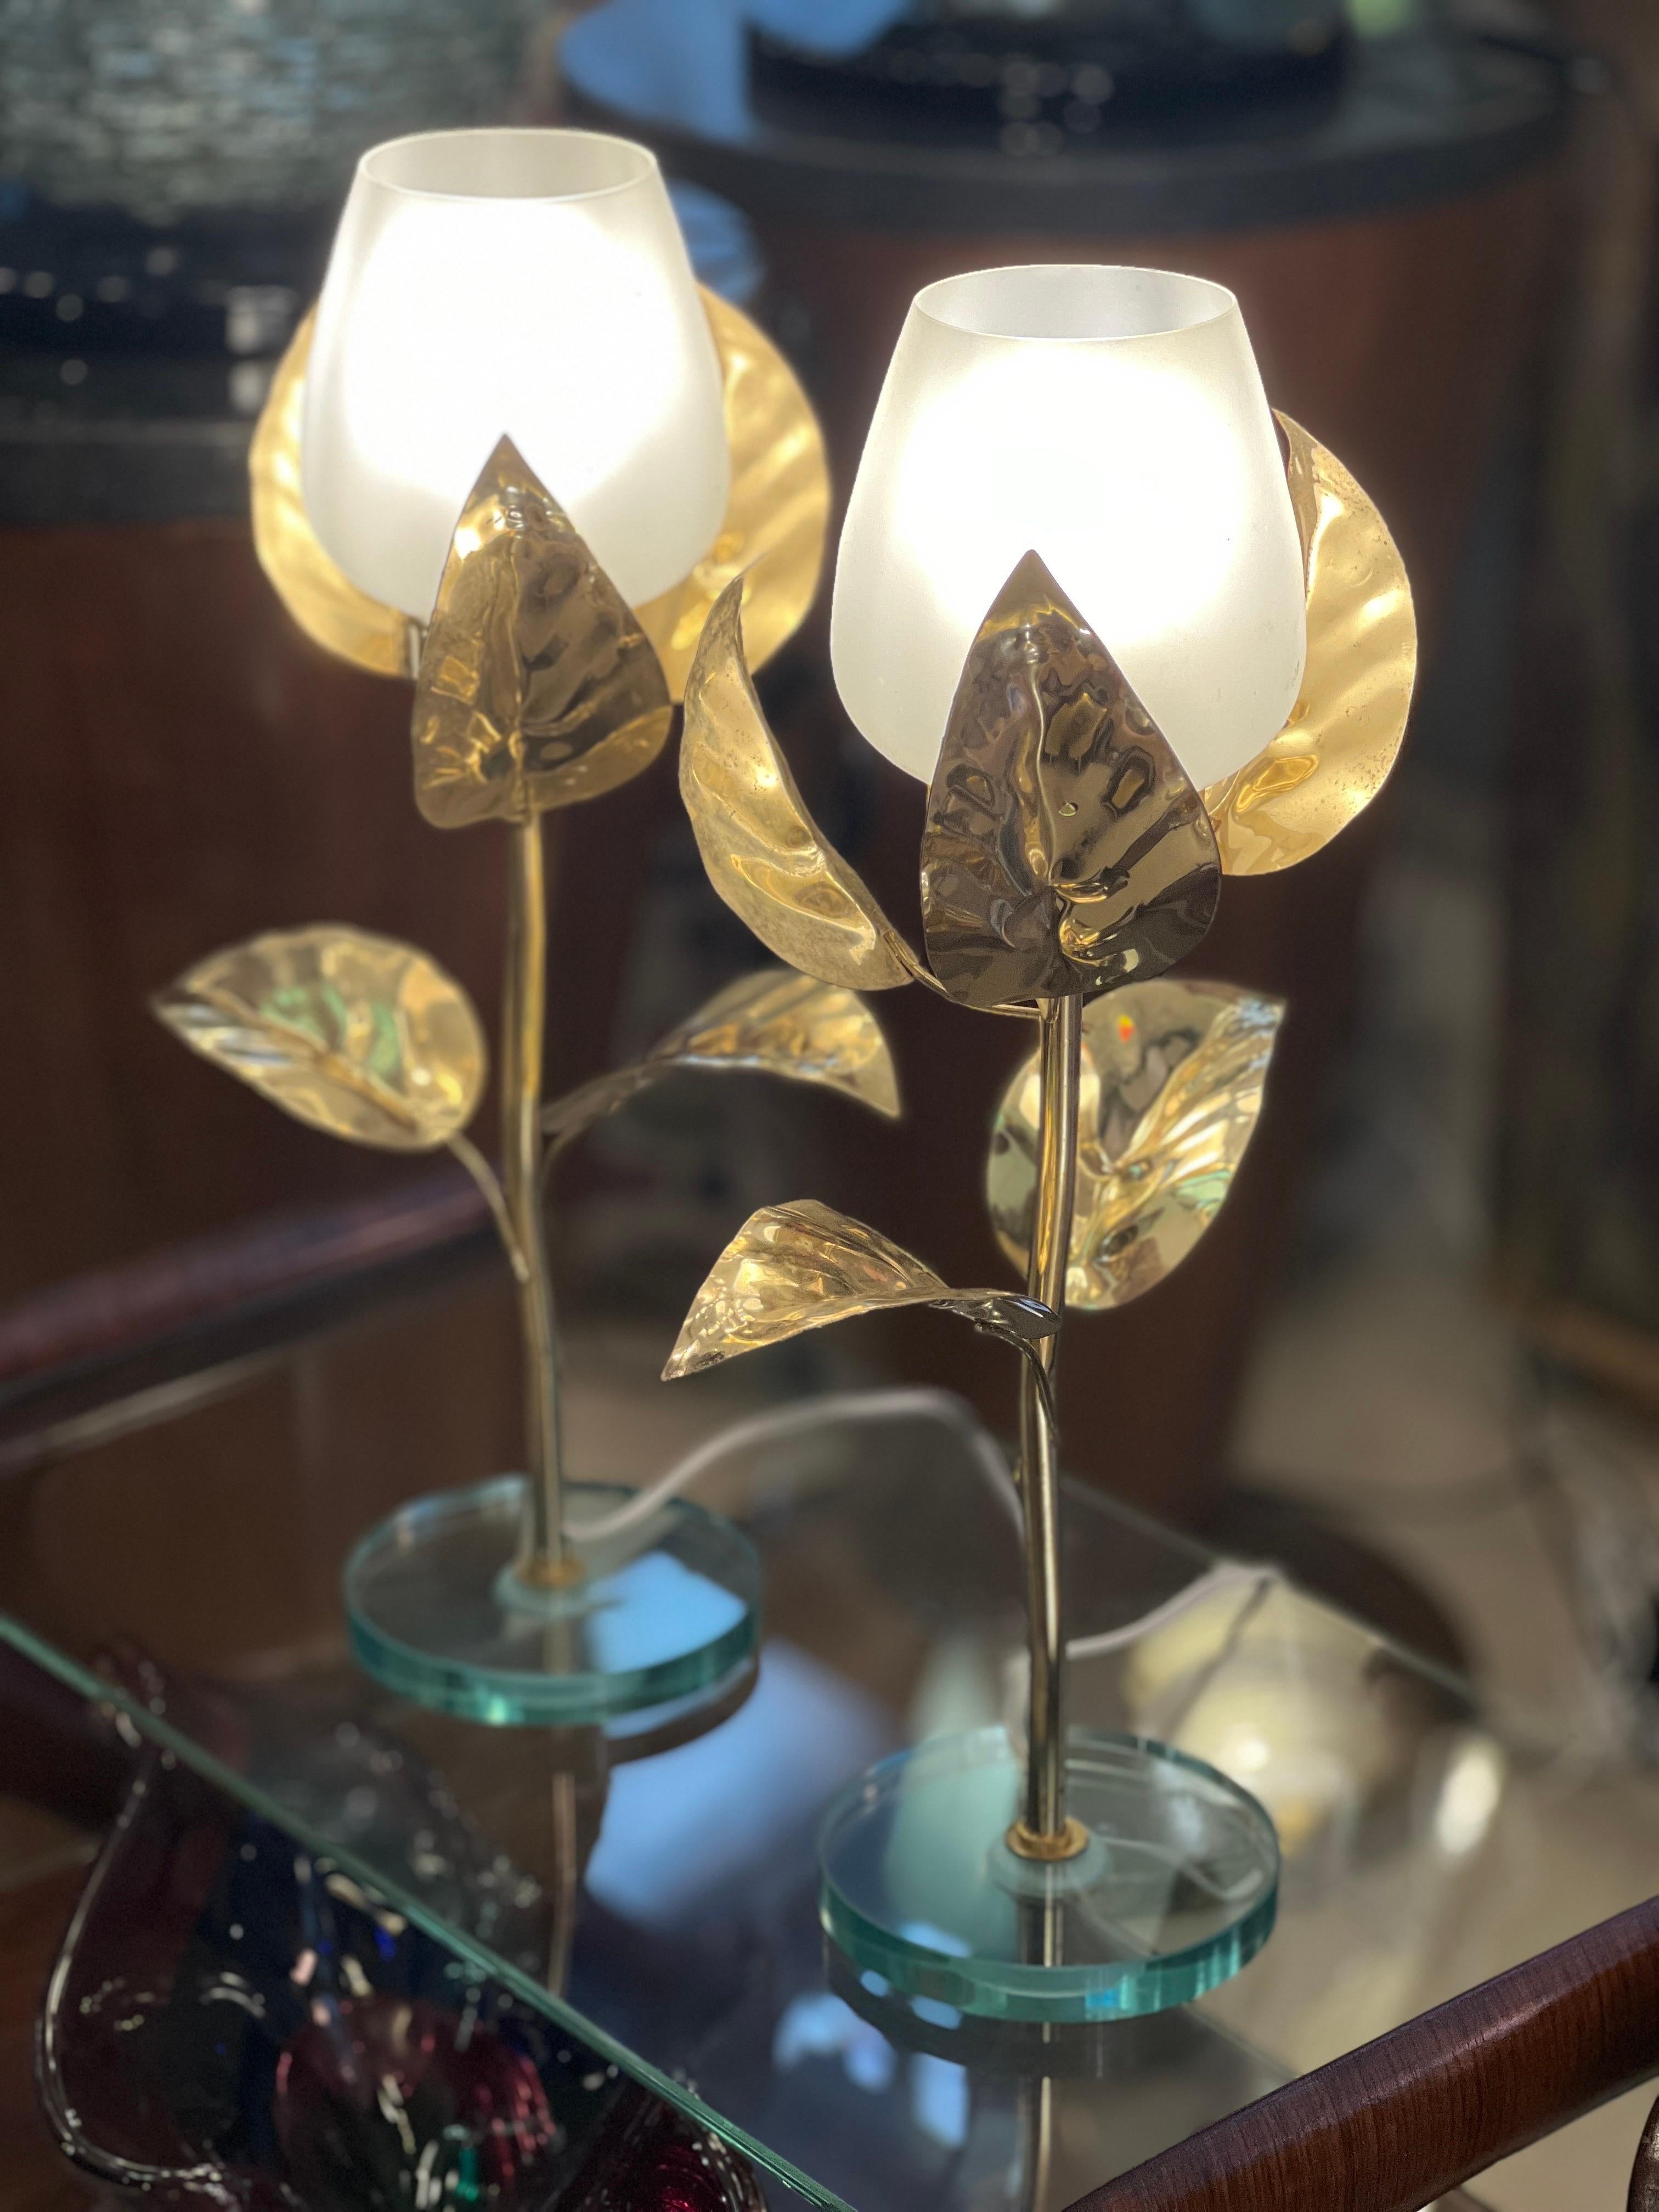  Pair of Mid-Century Flower-Shaped Lamps in White Murano Glass and Brass 1950s For Sale 11